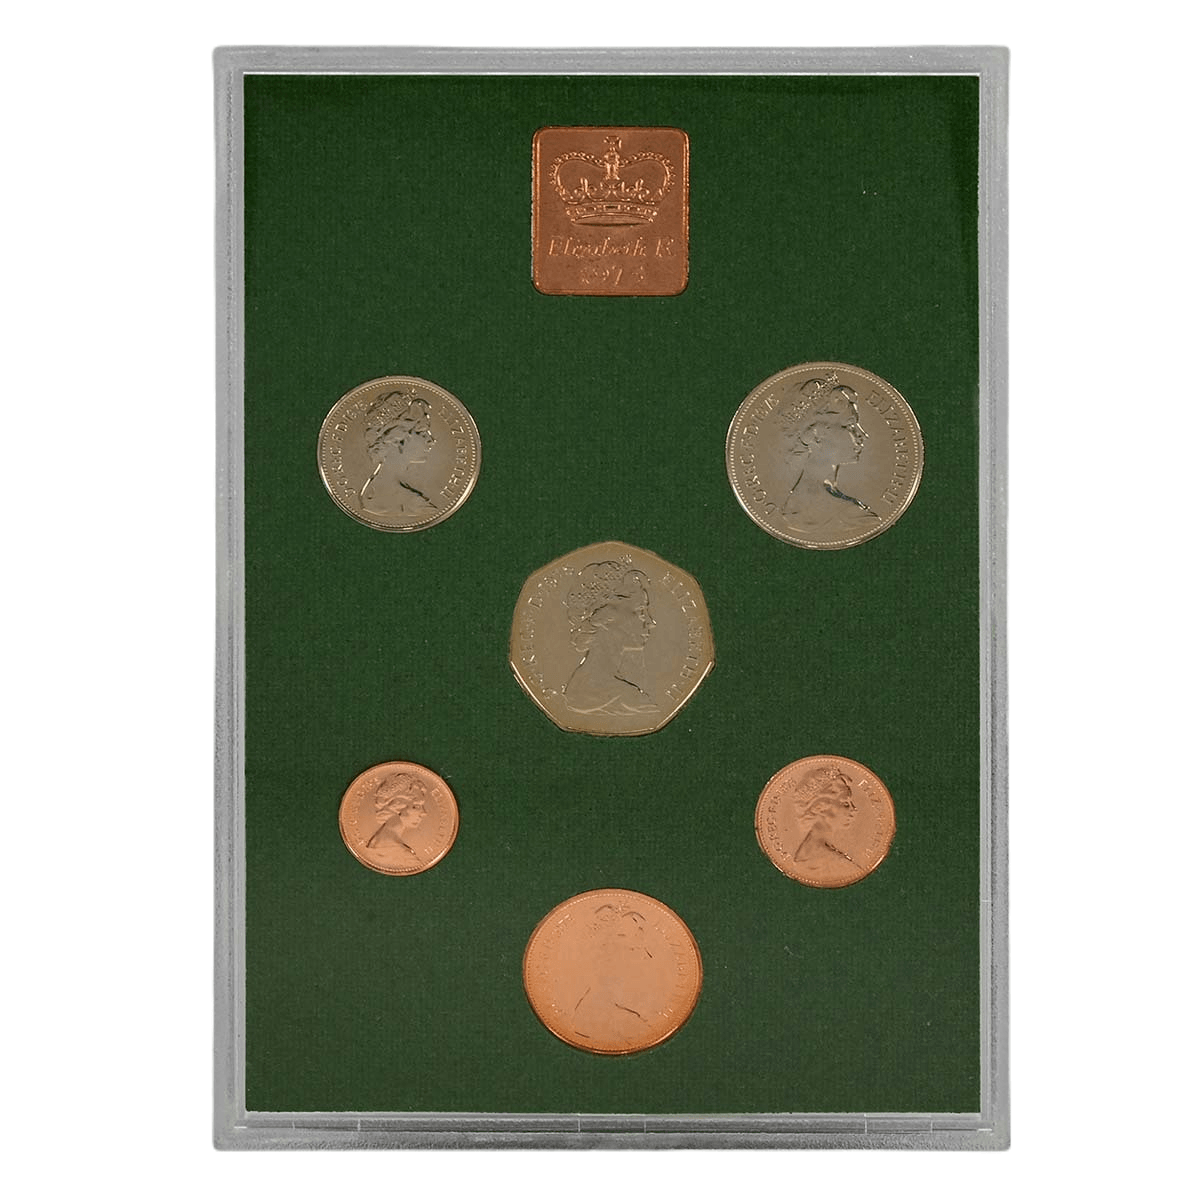 1975 UK Proof Annual 6 Coin Set - Loose Change Coins